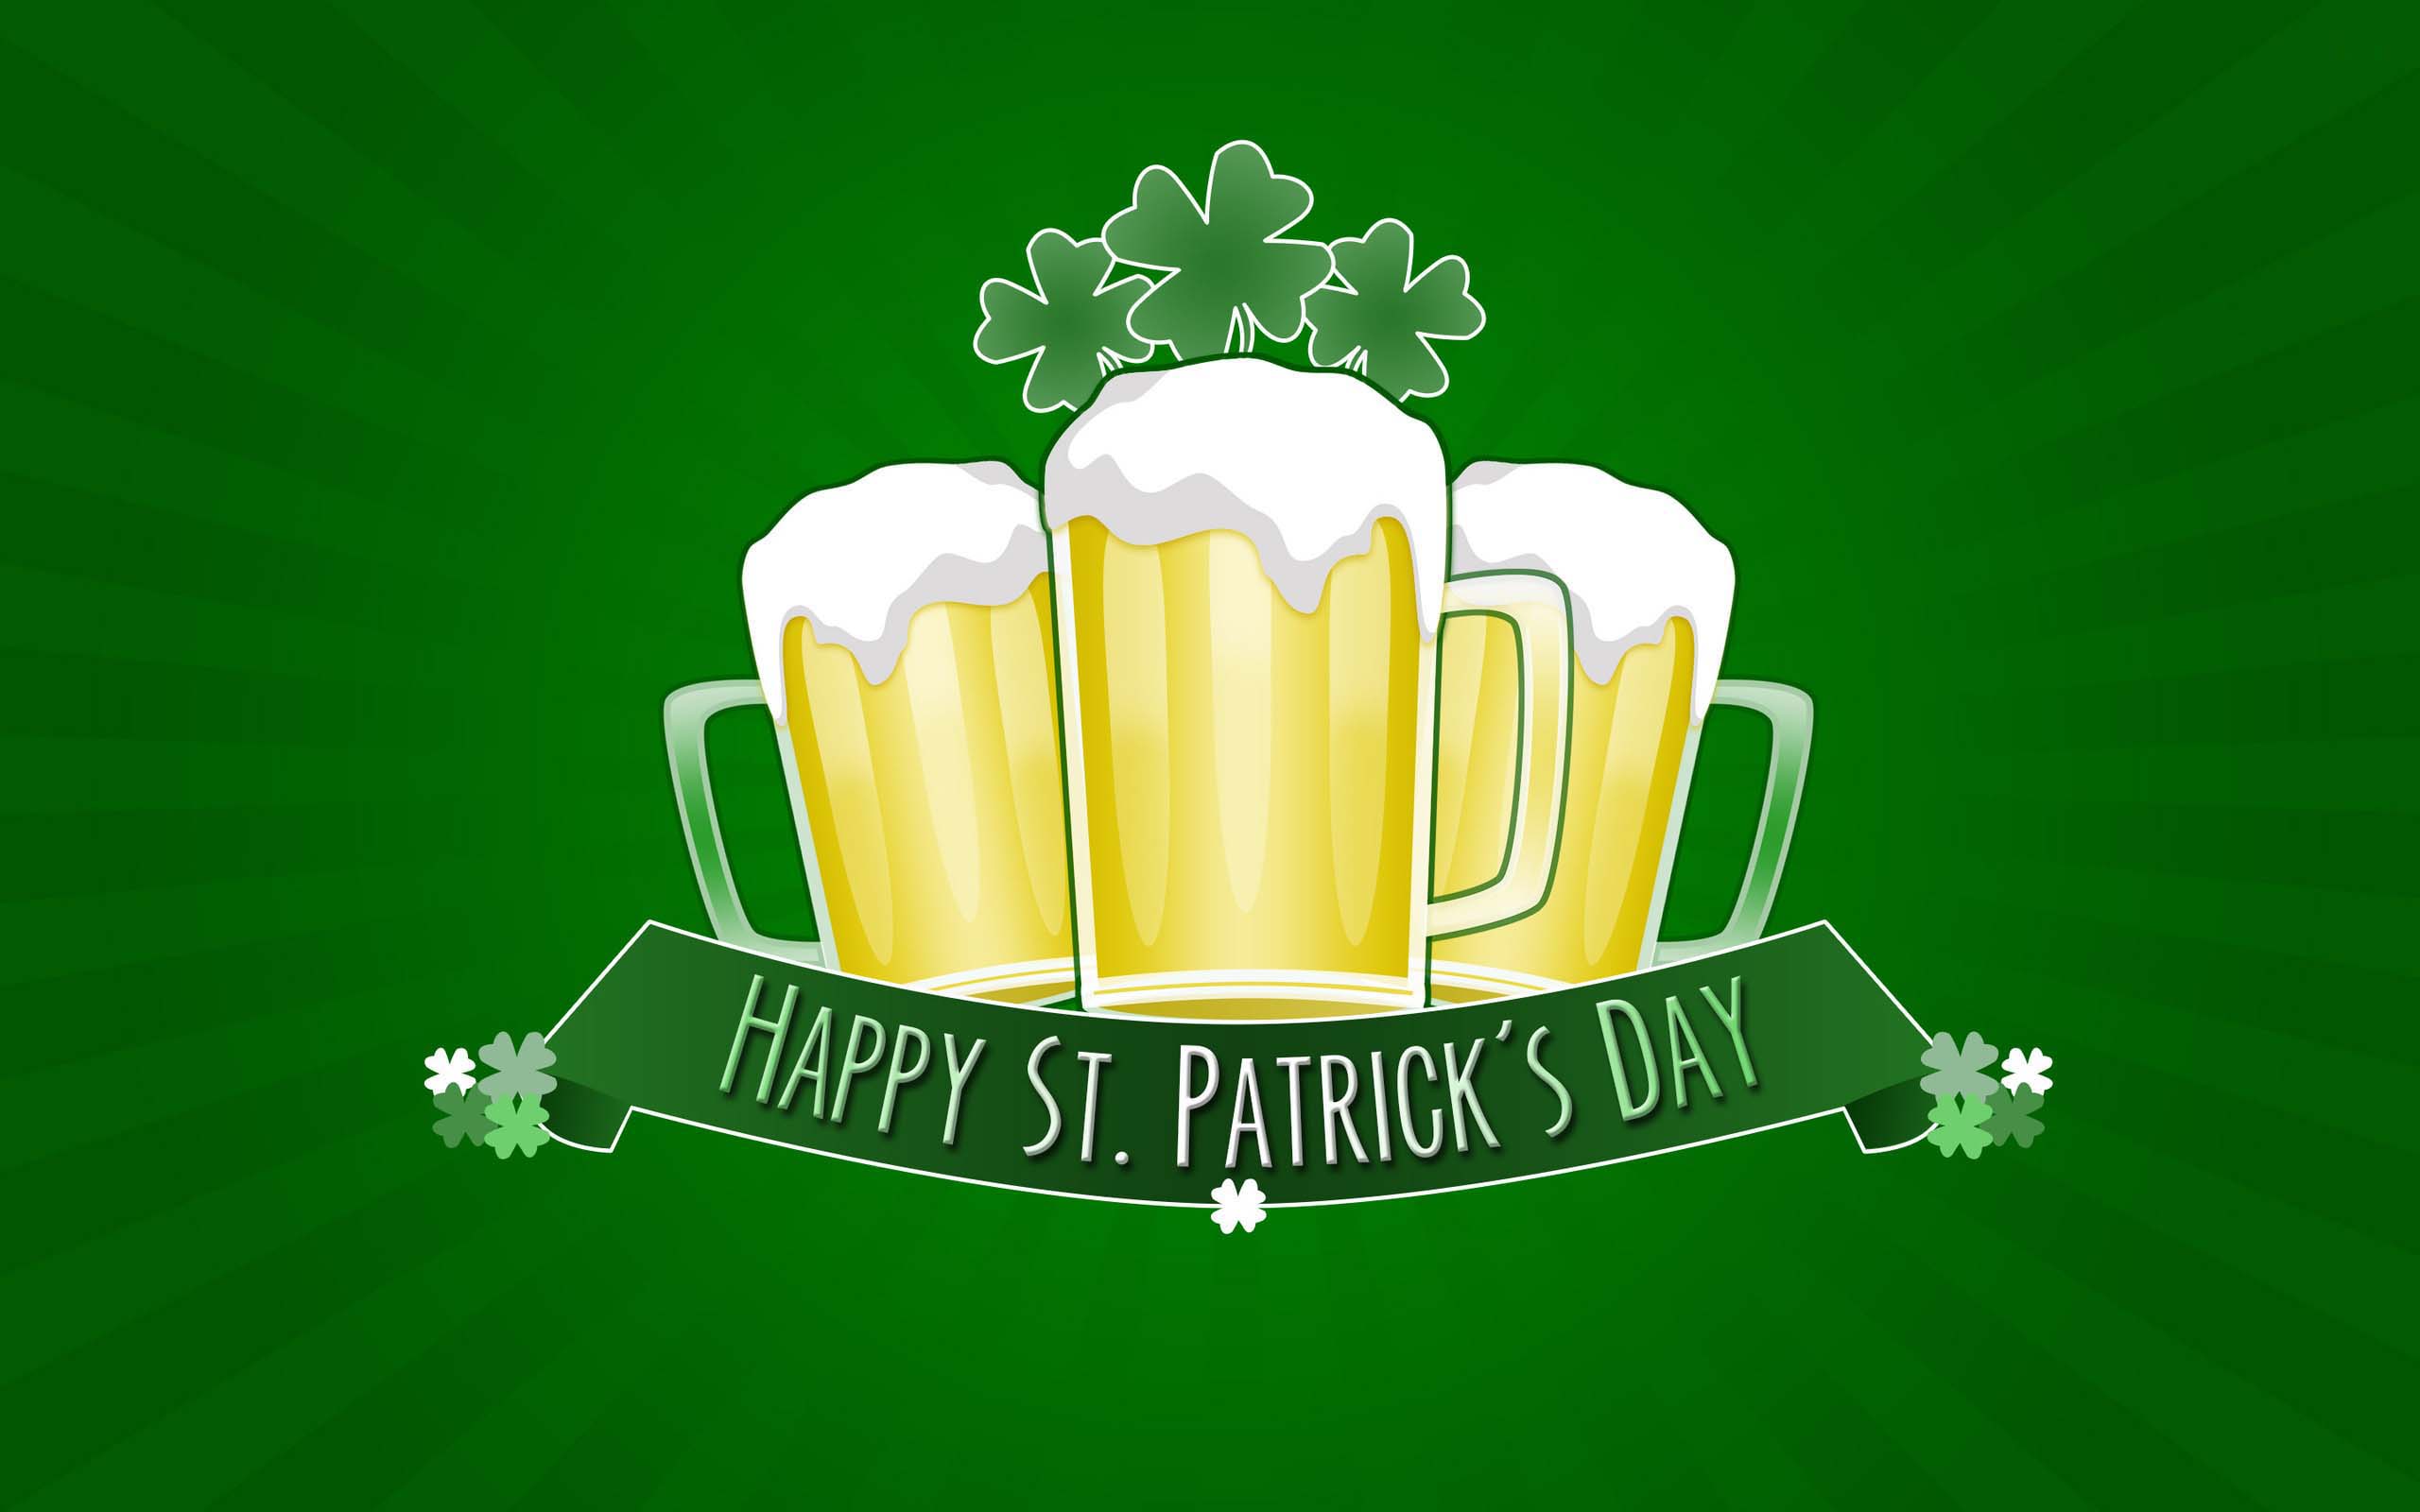 Happy St Patrick&;s Day Free Download Wallpaper 2880×1800. Cool PC